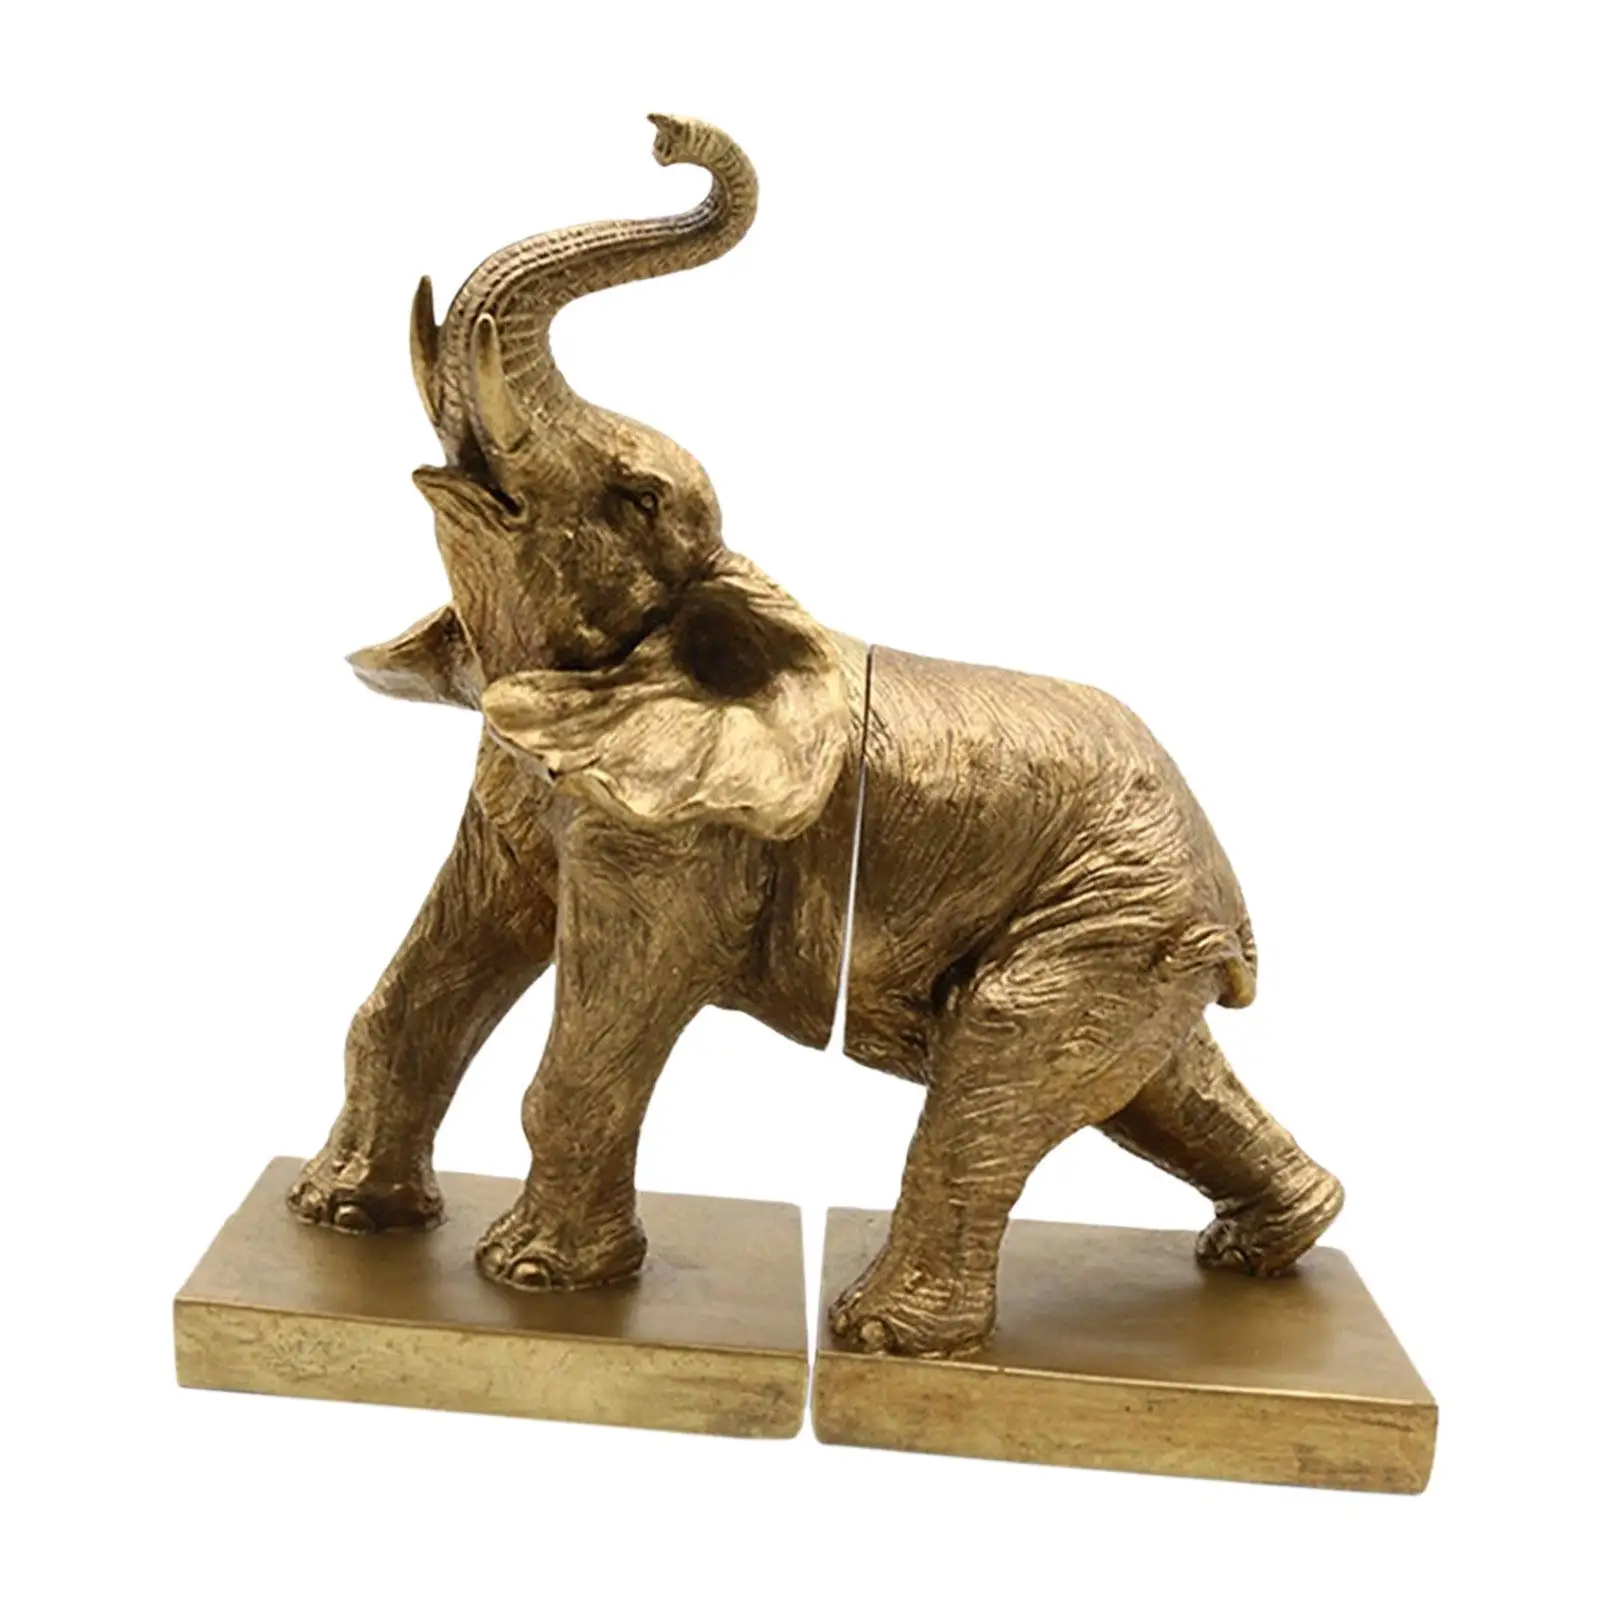 Elephant Figurine Bookfile Creative Ornament Nordic Book Stand Book Stopper for Home Living Room Wine Cabinet Tabletop Bookshelf